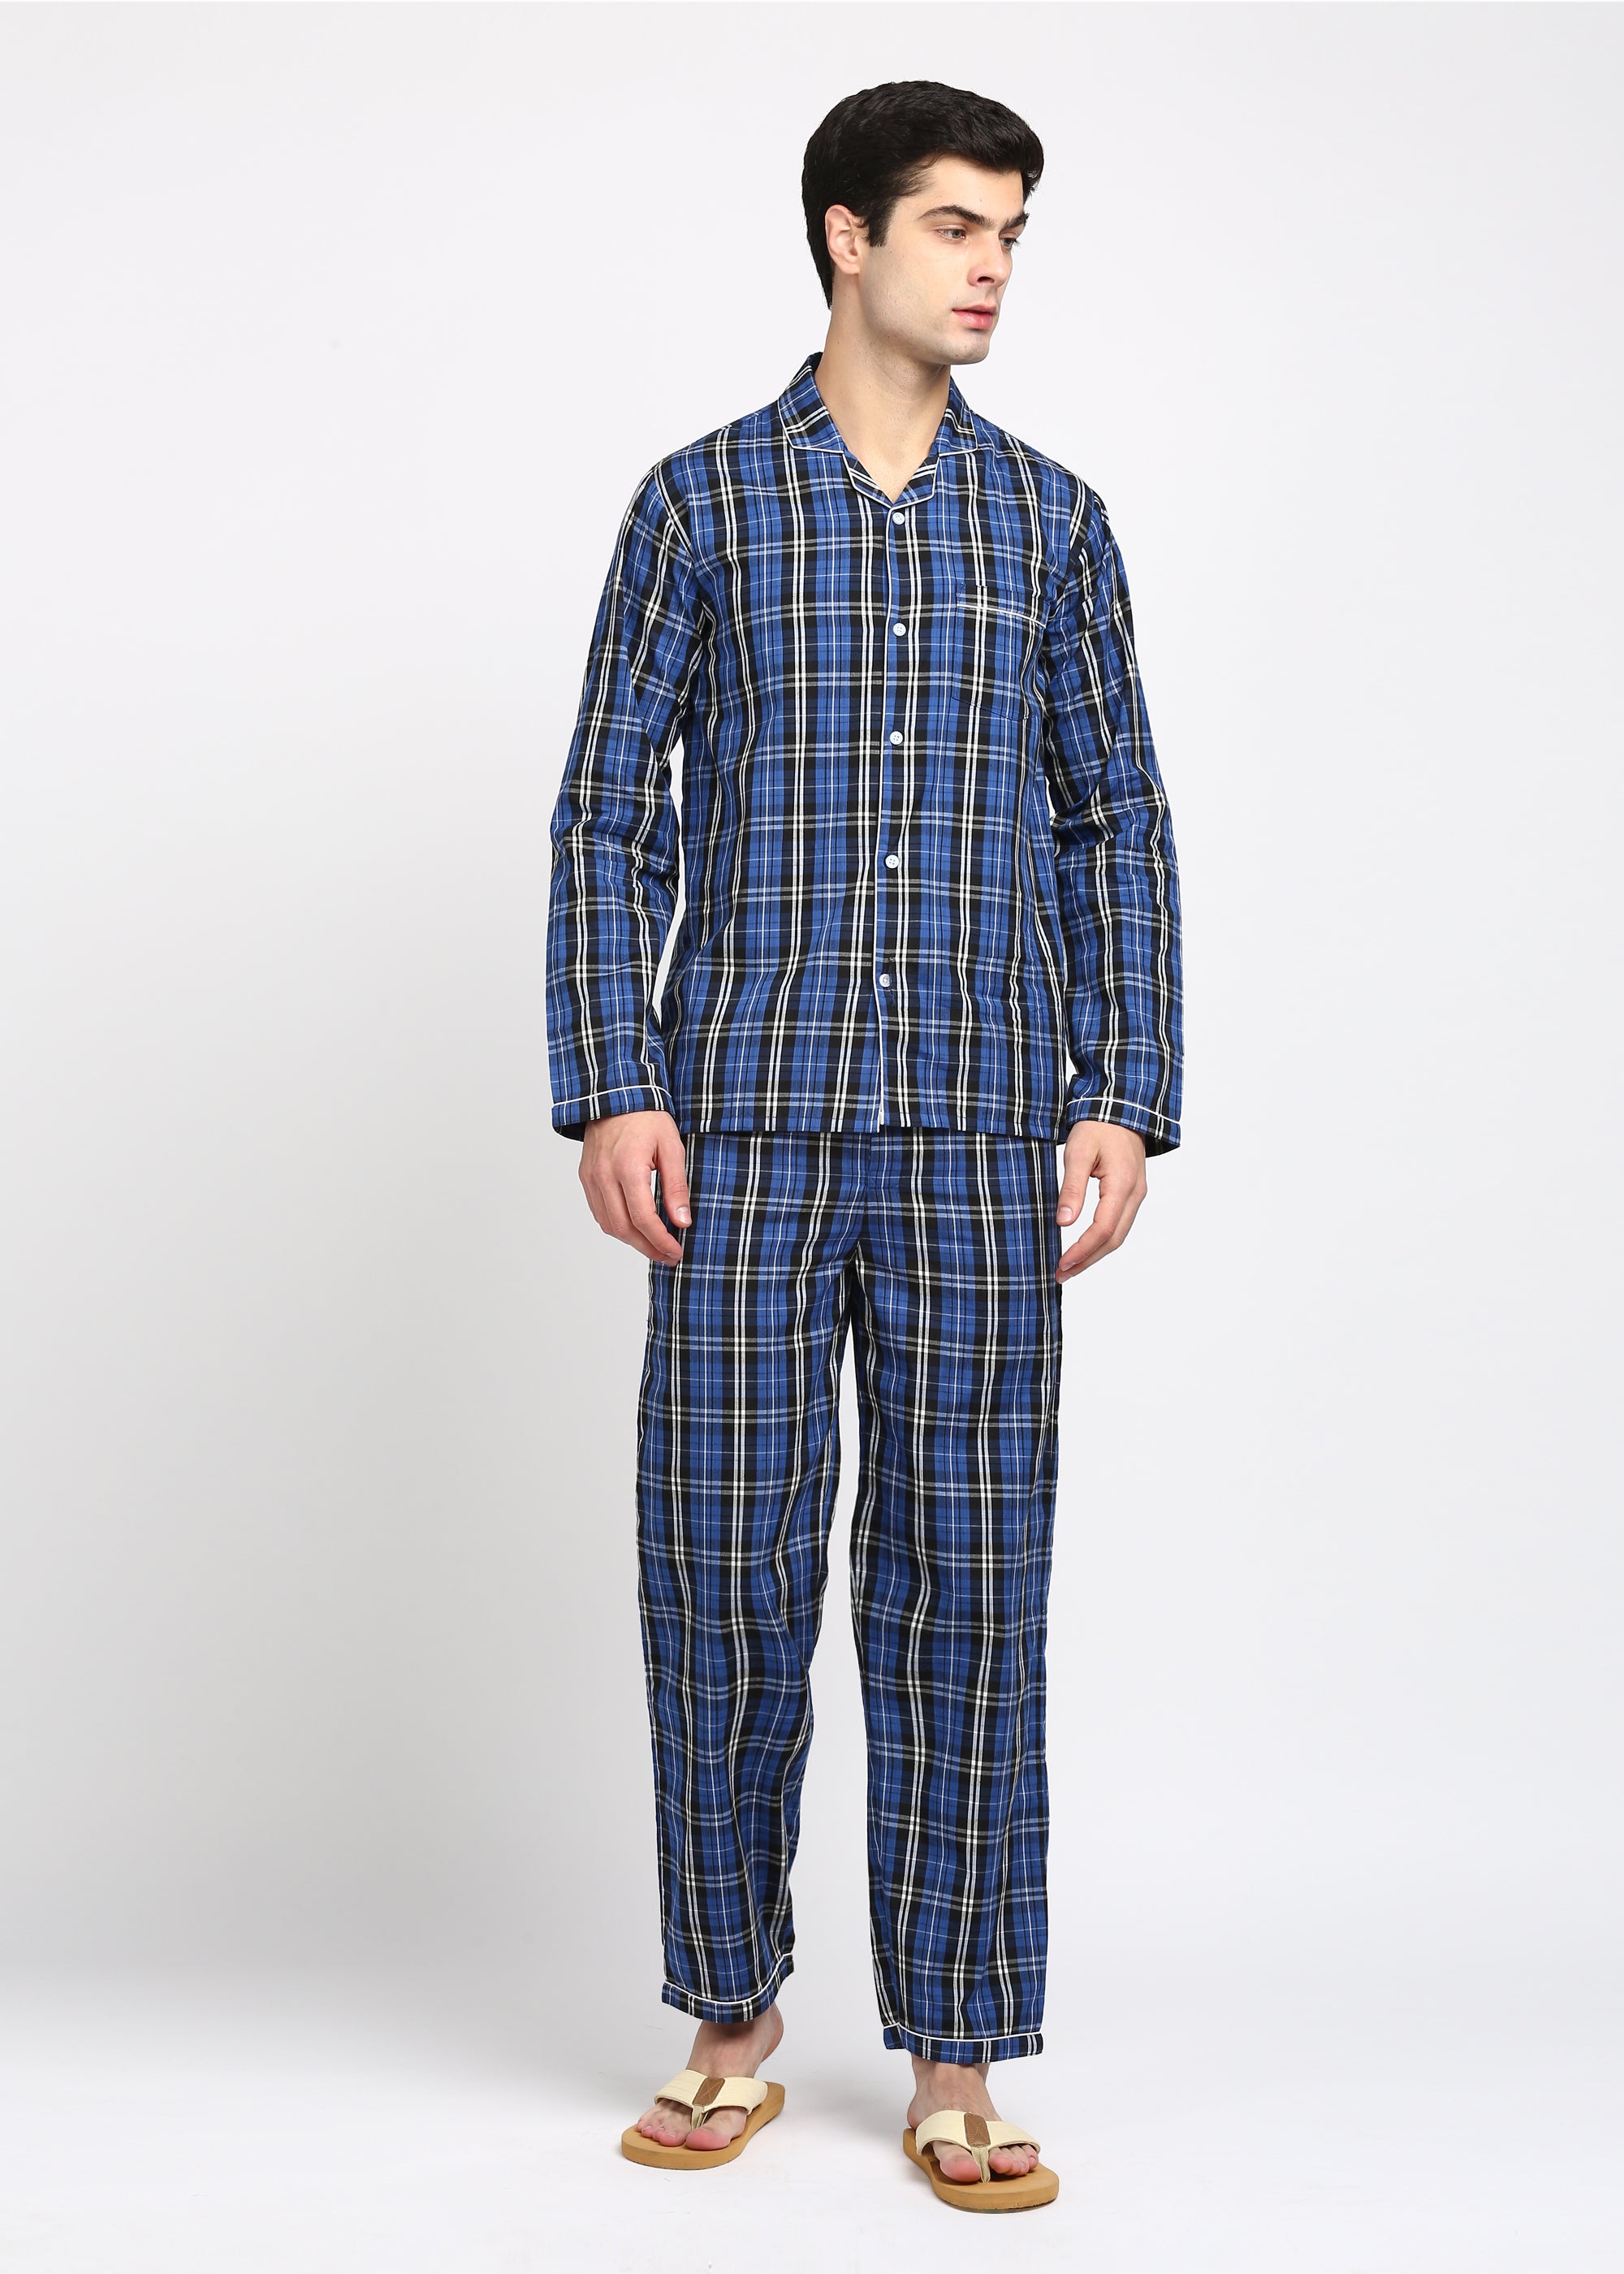 Blue and Black Checkered Long Sleeve Men's Night Suit - Shopbloom